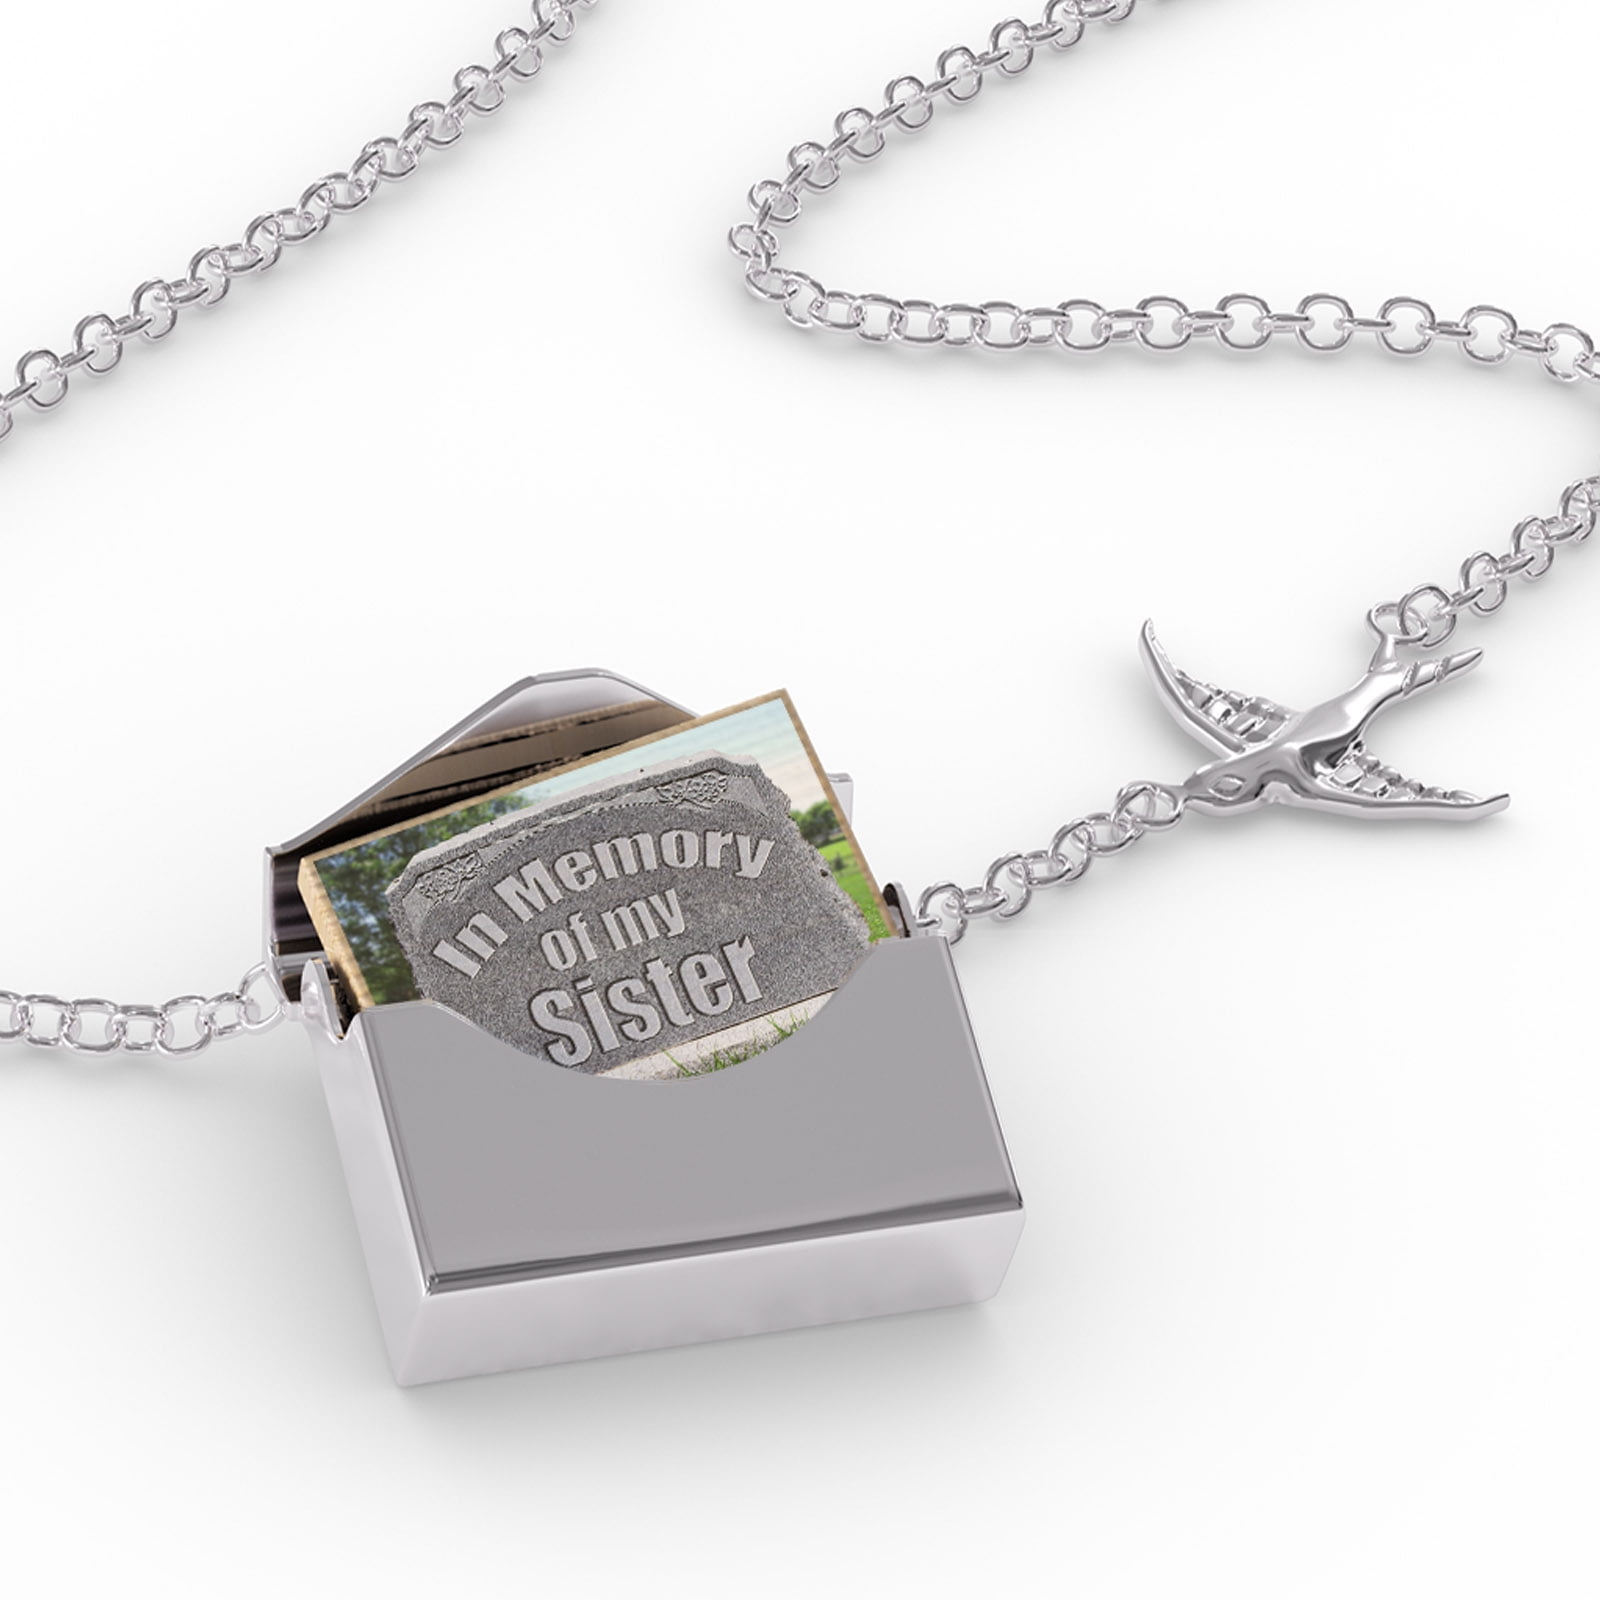 Locket Necklace In Memory of my Sister , R.I.P in a silver Envelope  Neonblond - Walmart.com